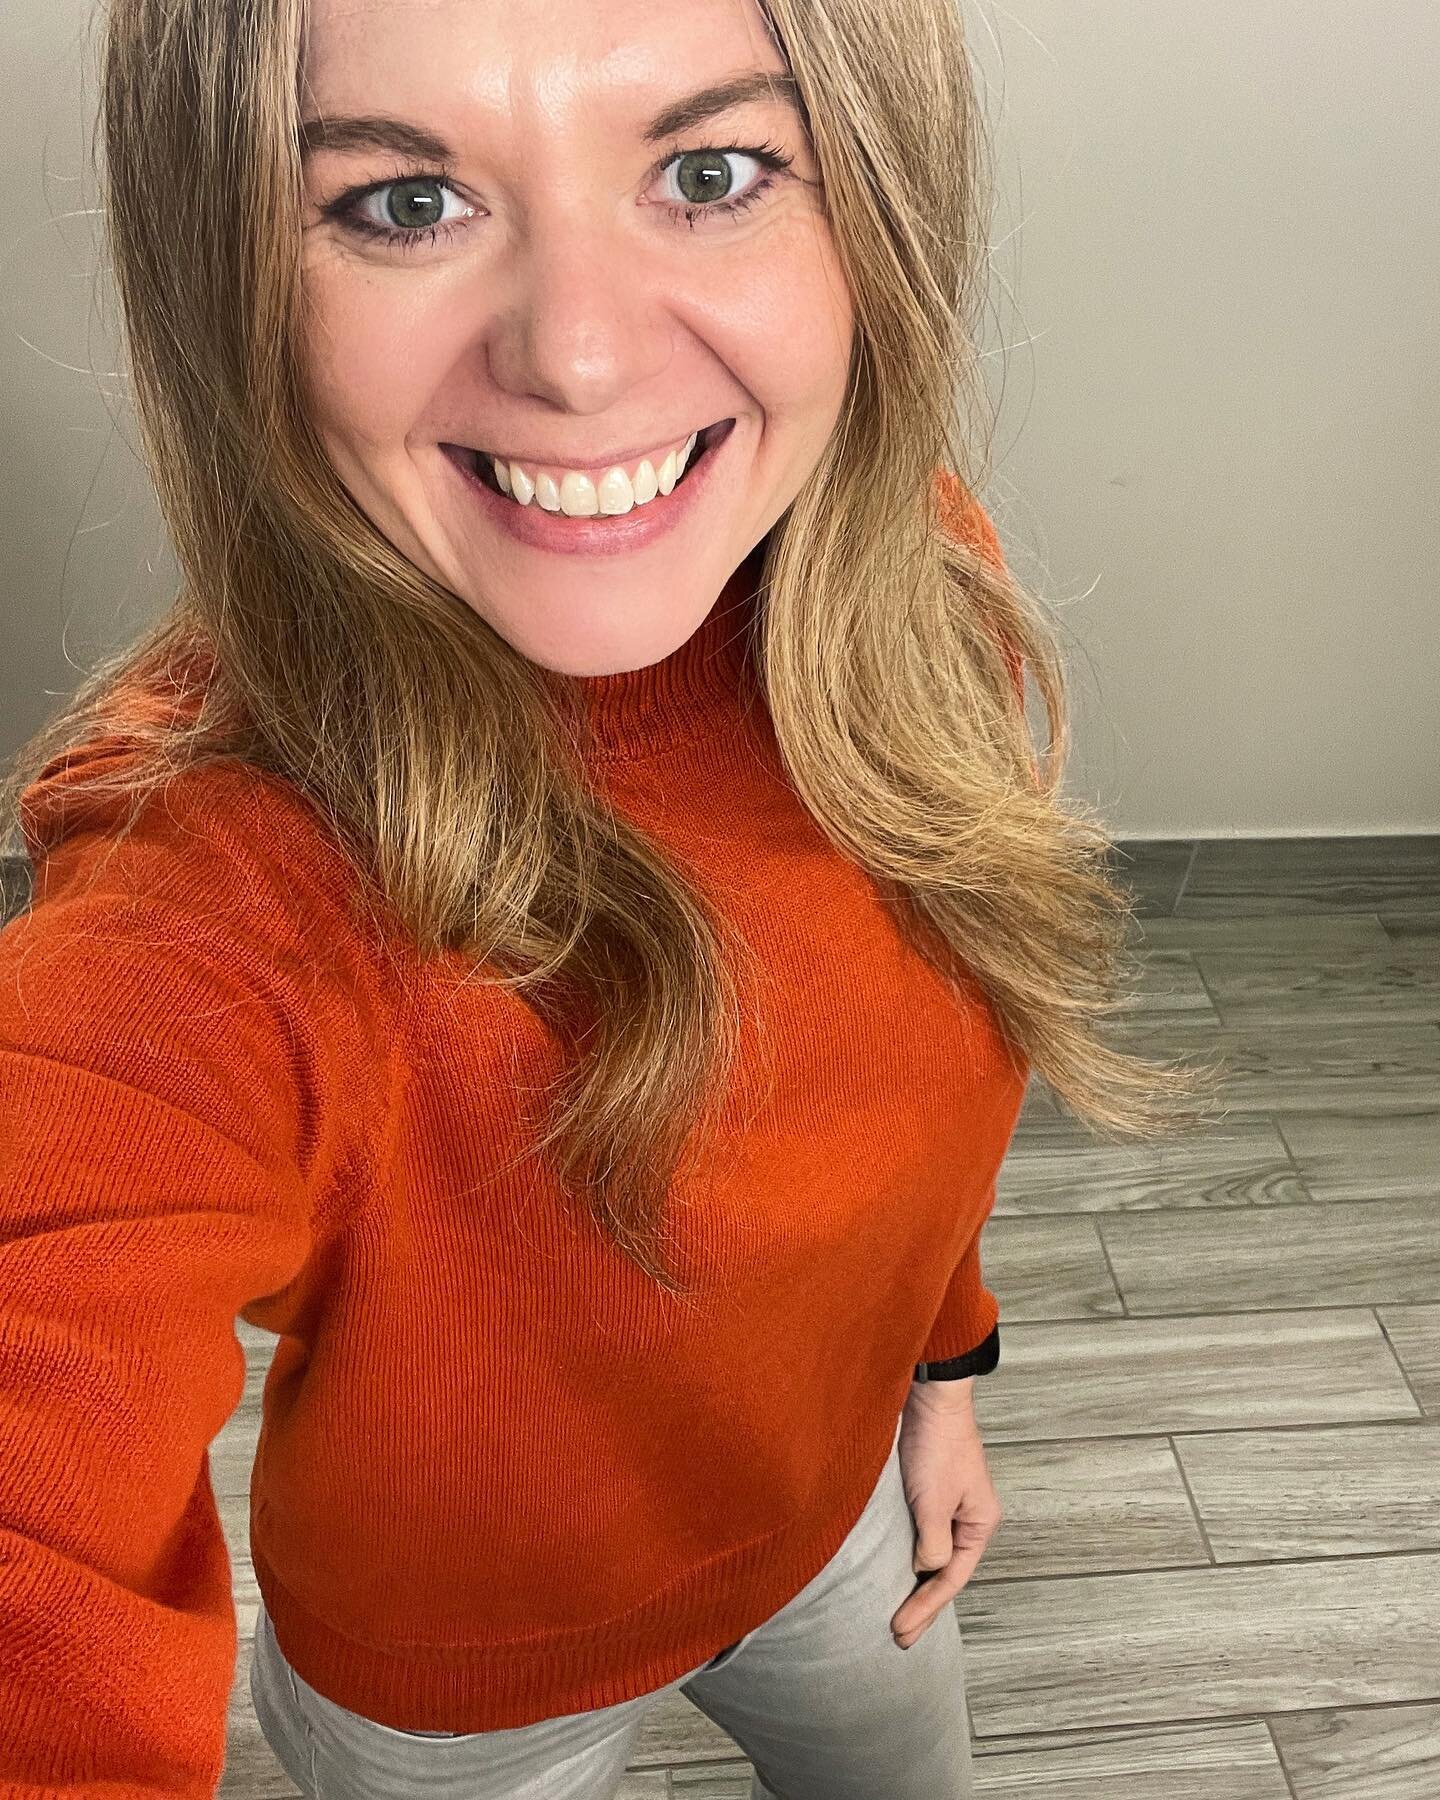 Hi! I&rsquo;m Rachael - a single, 30-something, Oklahoma native who co-hosts My Magic Morning Show. I&rsquo;ve also been a self-employed podcast editor and producer for the past 5 years. 

My interests include hiking in the mountains, watching OKC Th